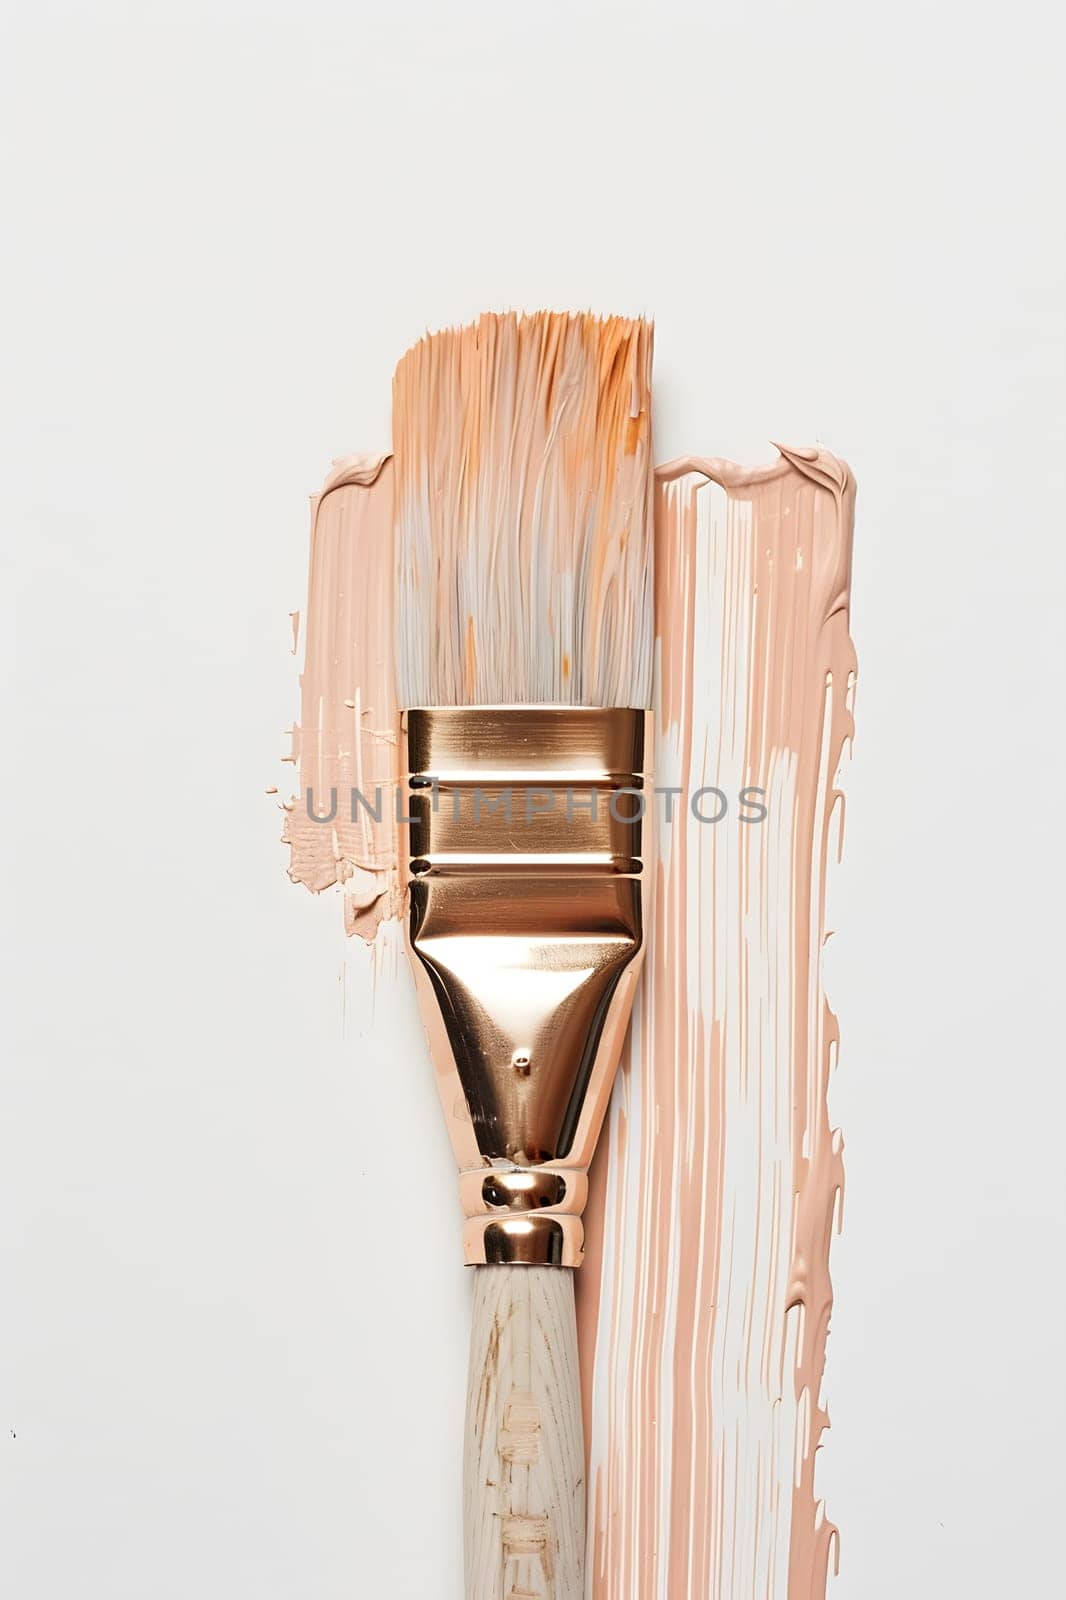 Paint brush and swatch of paint on a white surface by Nadtochiy